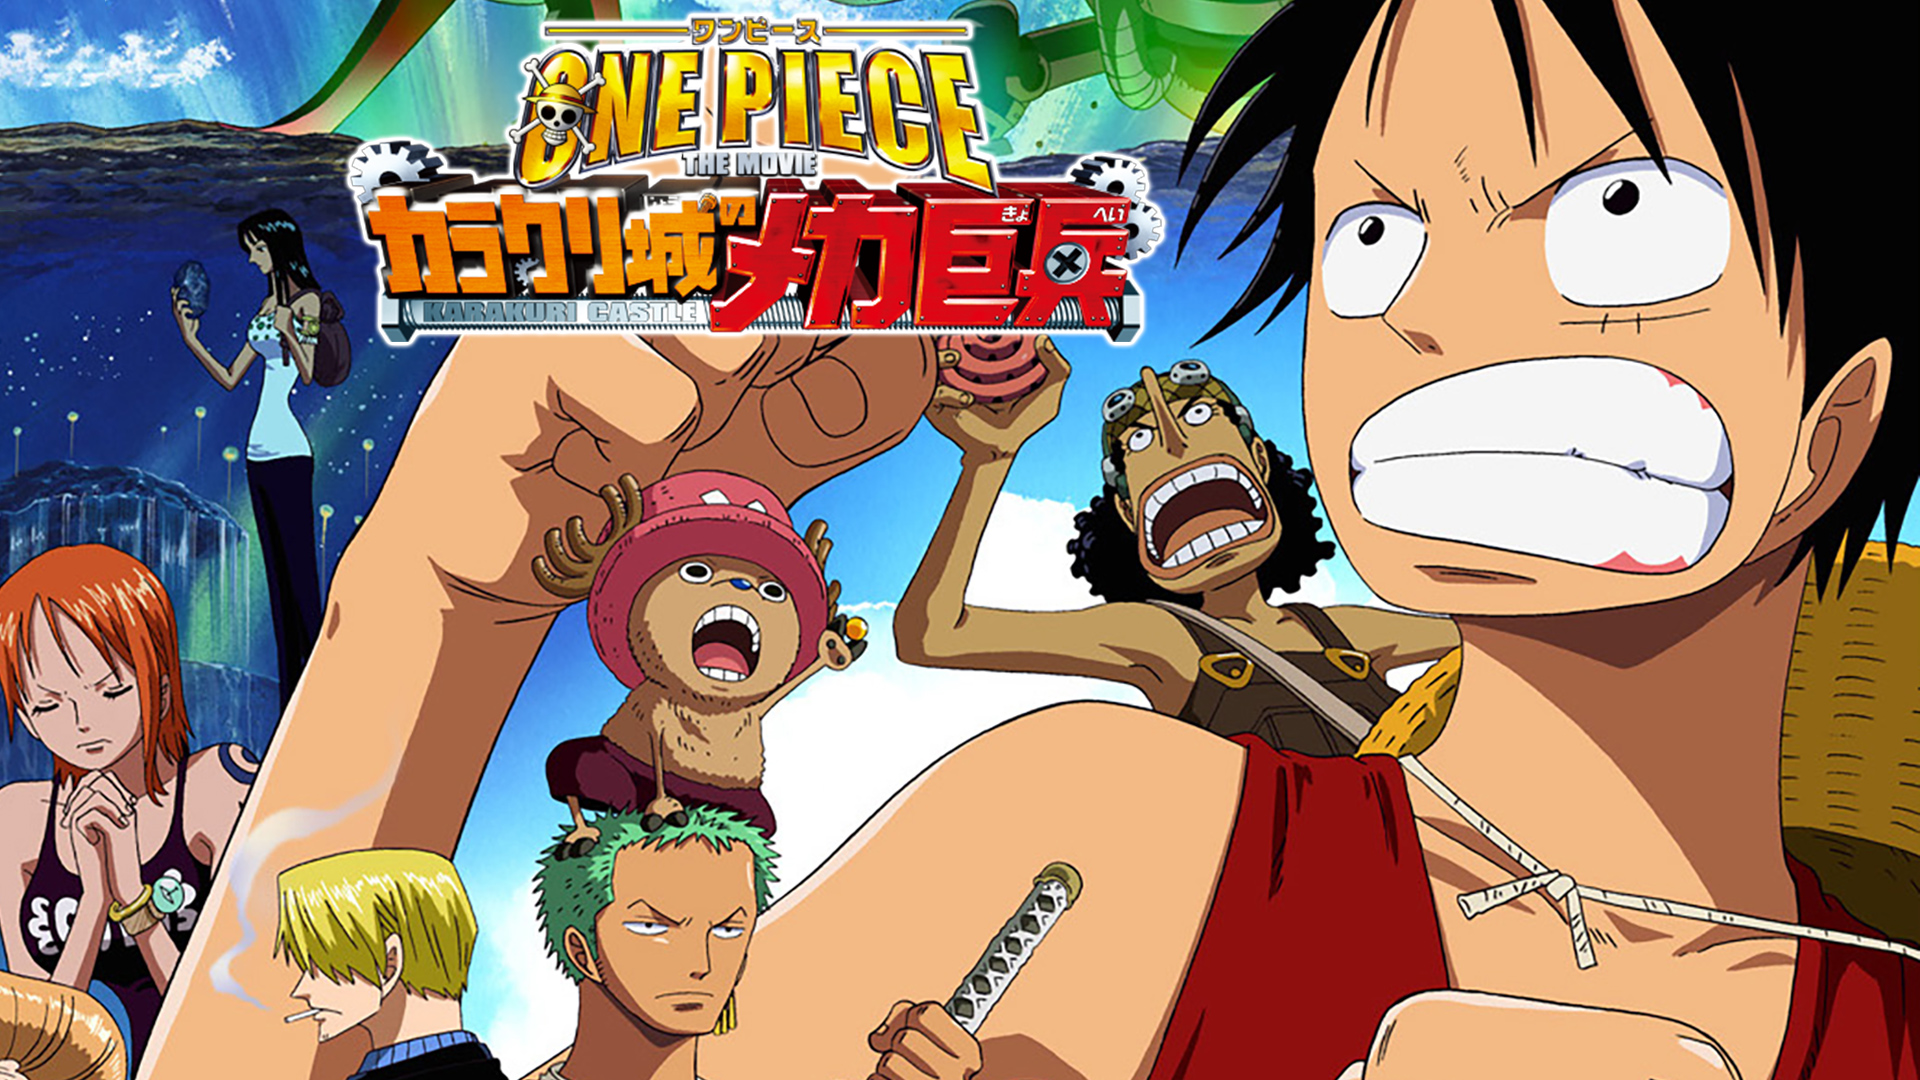 ONE PIECE THE MOVIE カラクリ城のメカ巨兵 / One Piece: The Giant Mechanical Soldier of Karakuri Castle